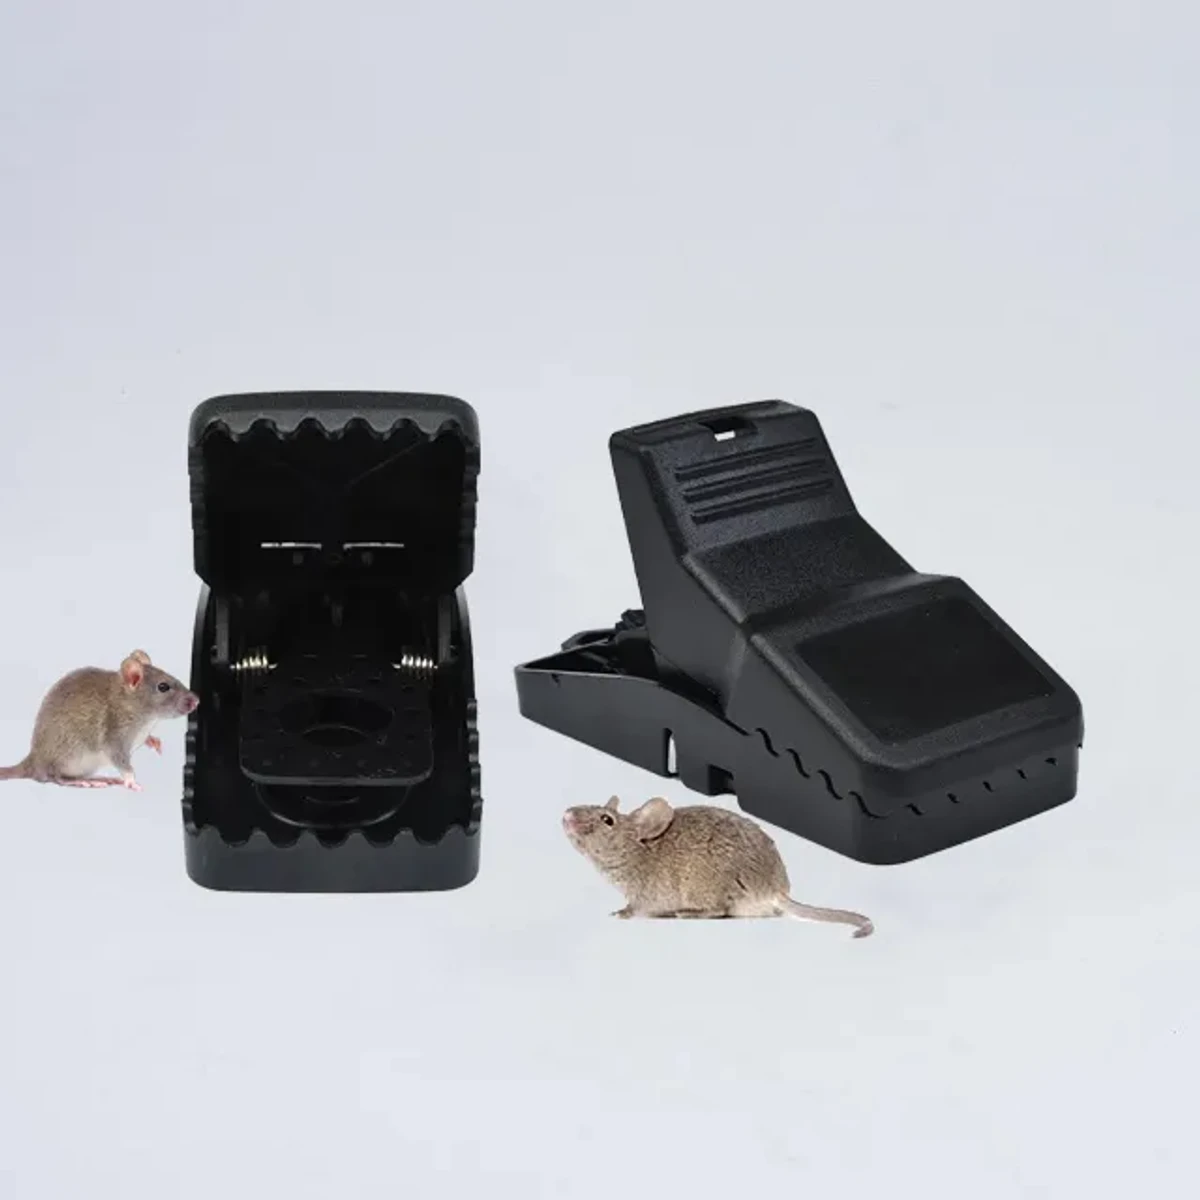 3 PCS RAT TRAP FOR HOUSE AND OFFICE